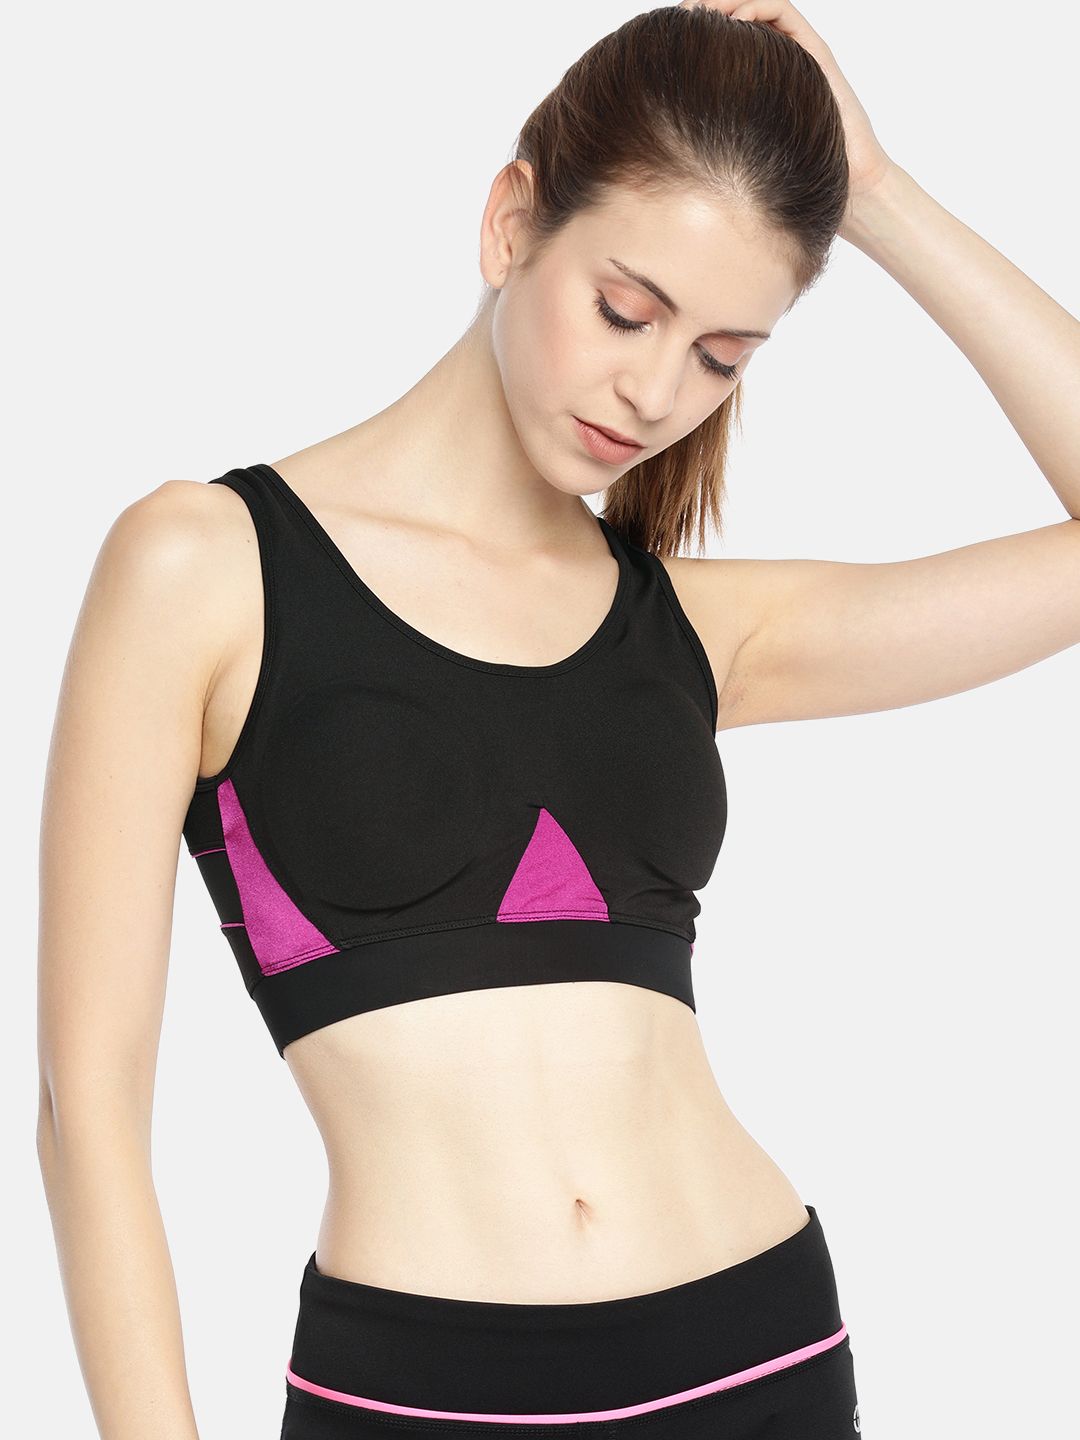 AND Black Colourblocked Non-Wired Lightly Padded Activewear Sports Bra 8907861918548 Price in India